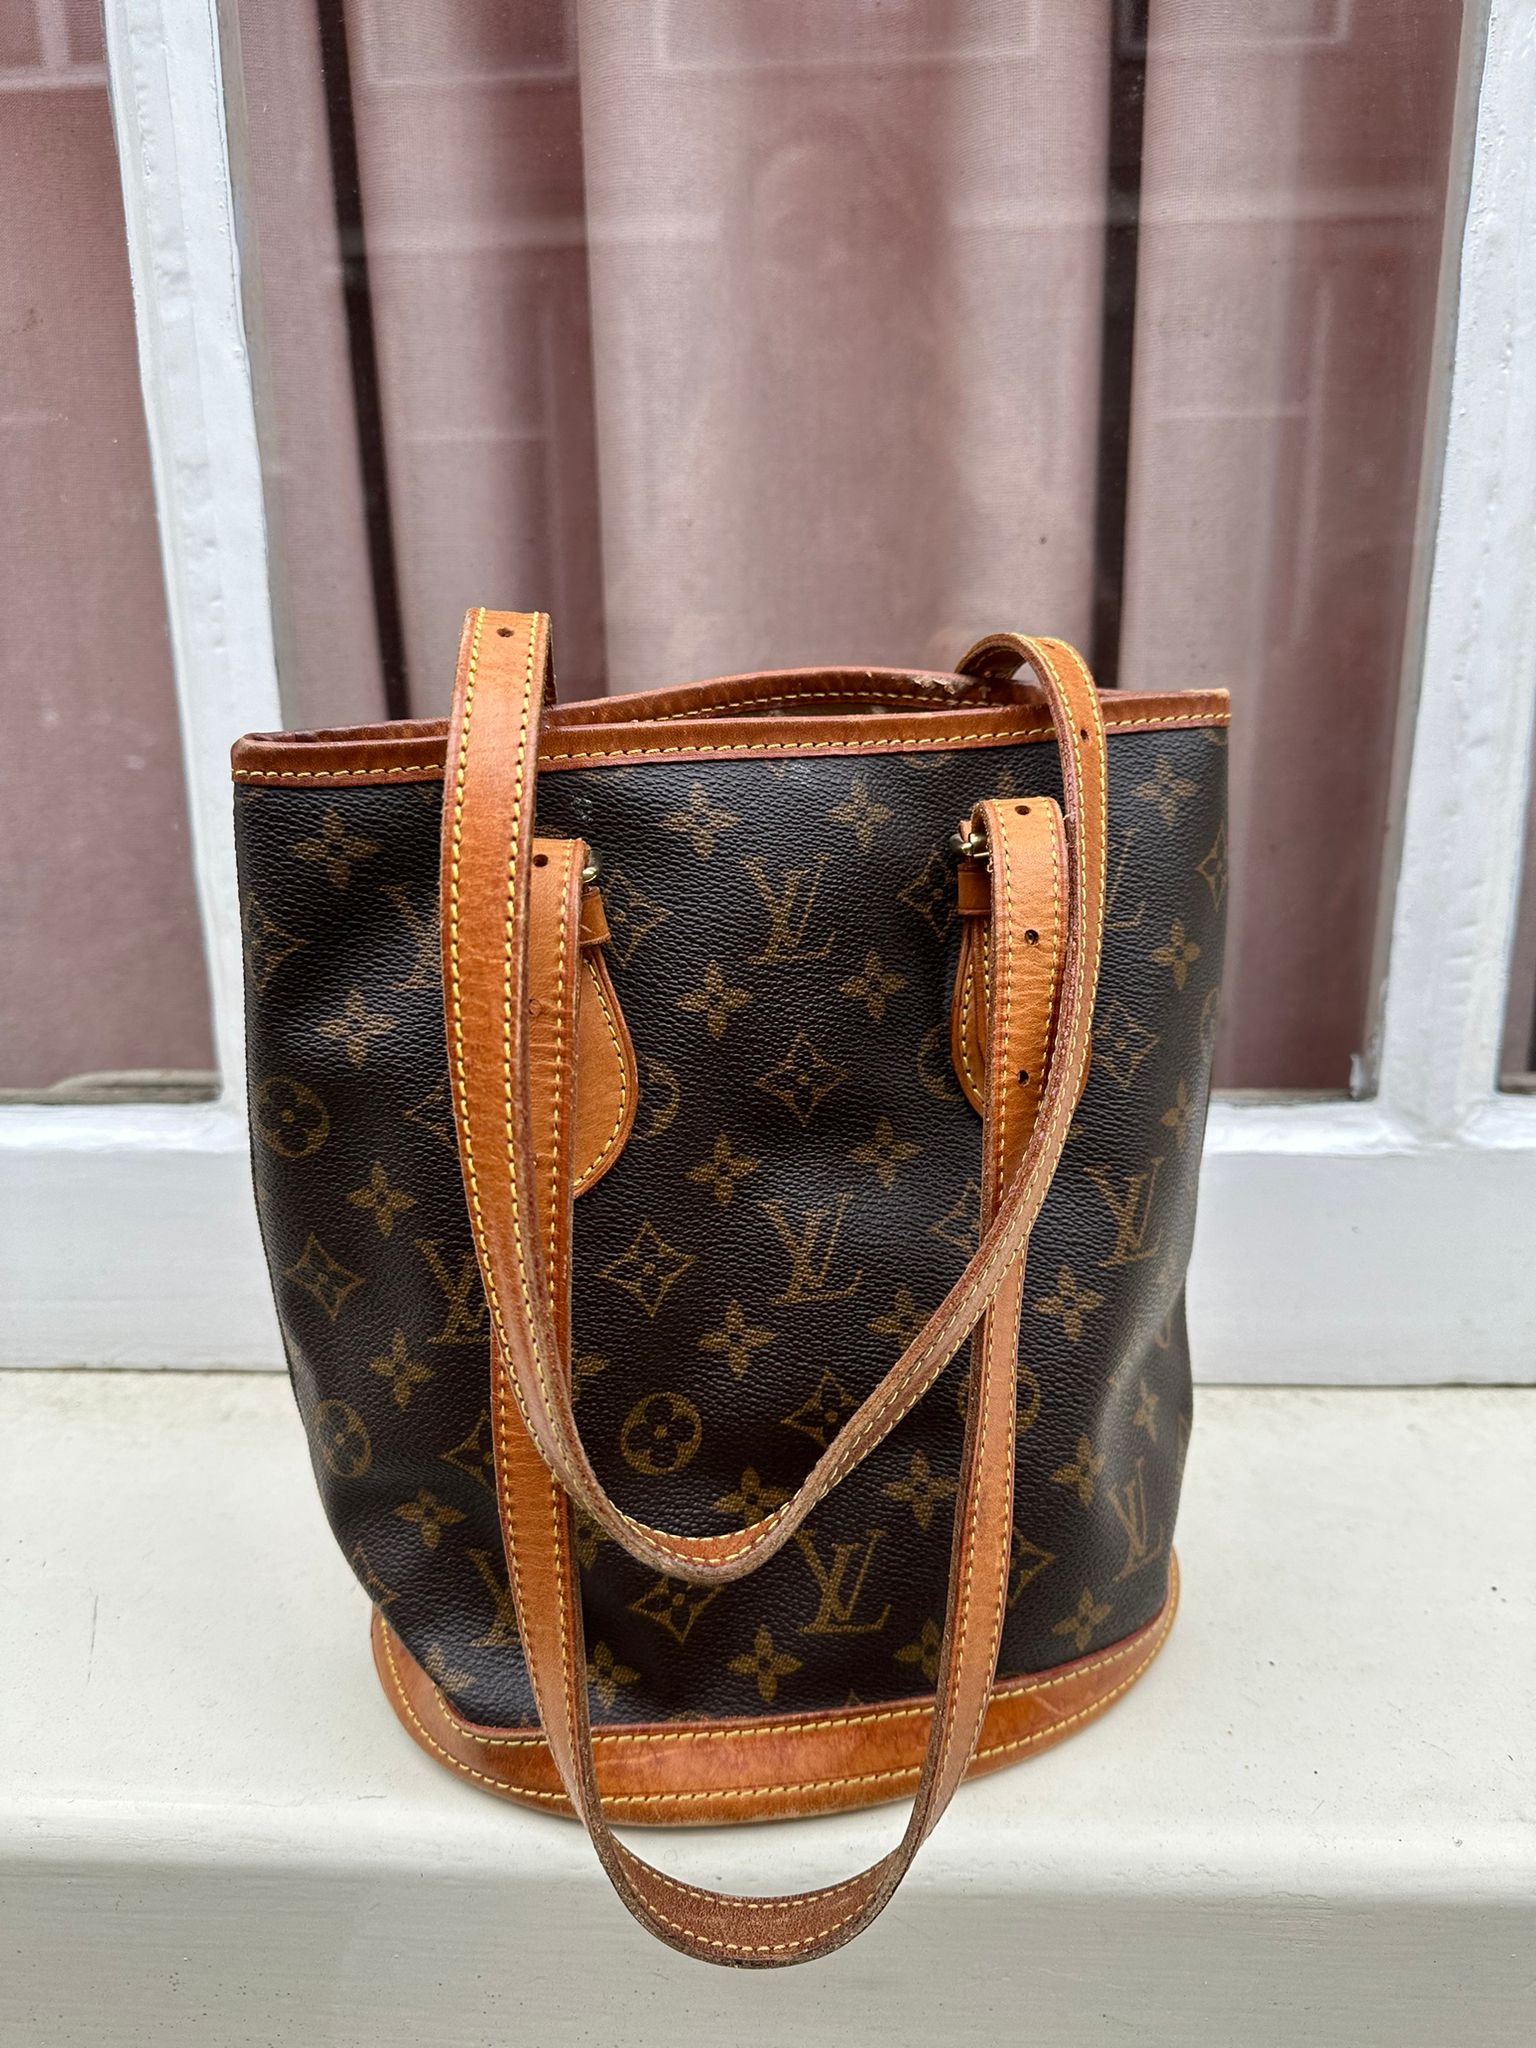 LOUIS VUITTON Bucket bag for women  Buy or Sell your Luxury bags   Vestiaire Collective